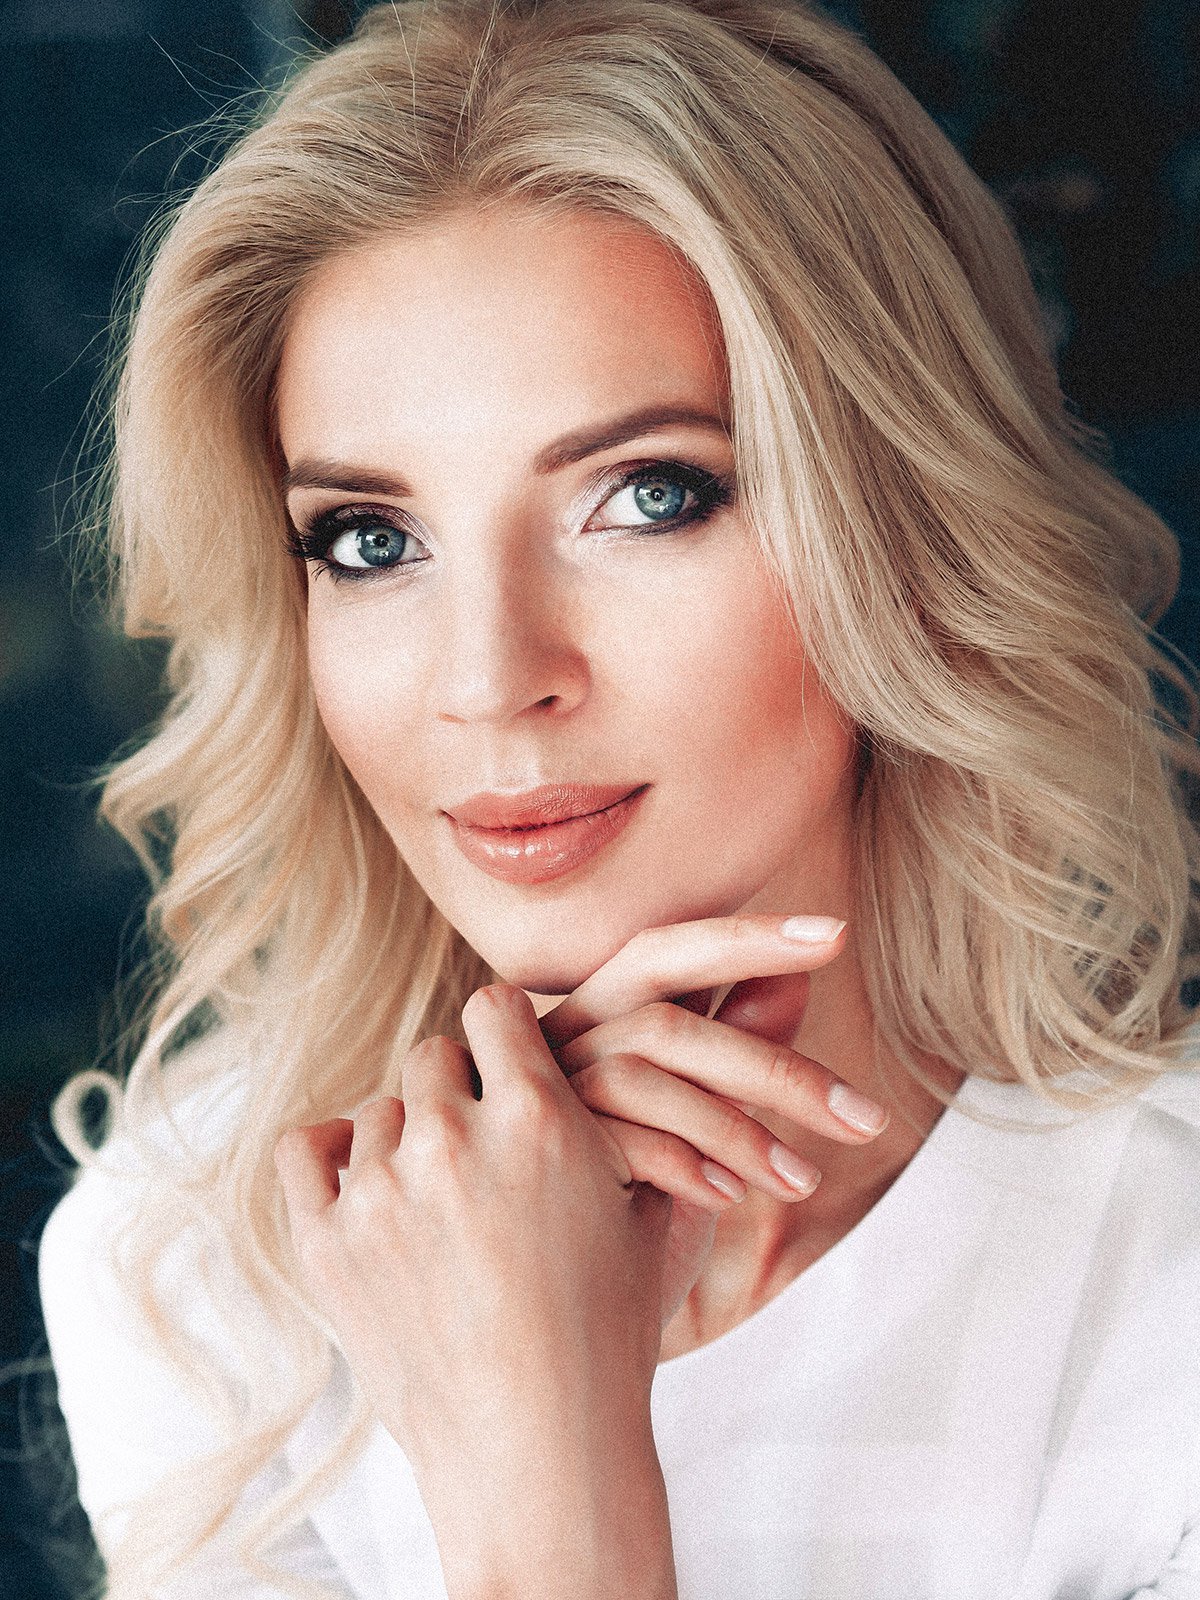 blonde lower blepharoplasty patient model in a white top resting her chin on her hands